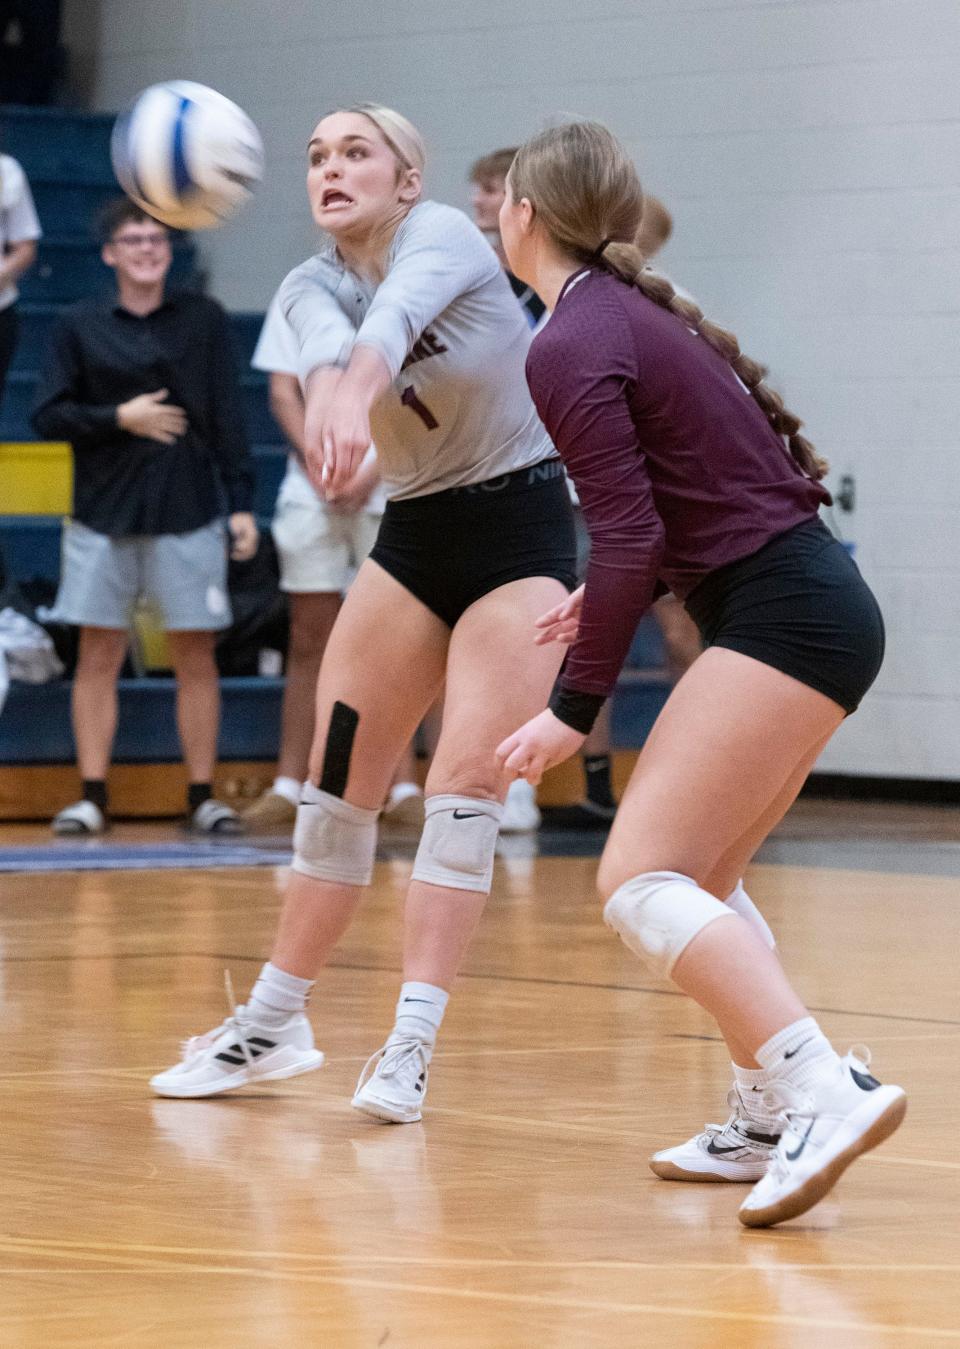 Navarre High School's Addison Danforth (No. 7) digs a Gulf Breeze serve during Wednesday's Region 1-6A quarterfinals match against the Dolphins. Navarre dropped three straight to Gulf Breeze 25-20, 25-18, 25-16.